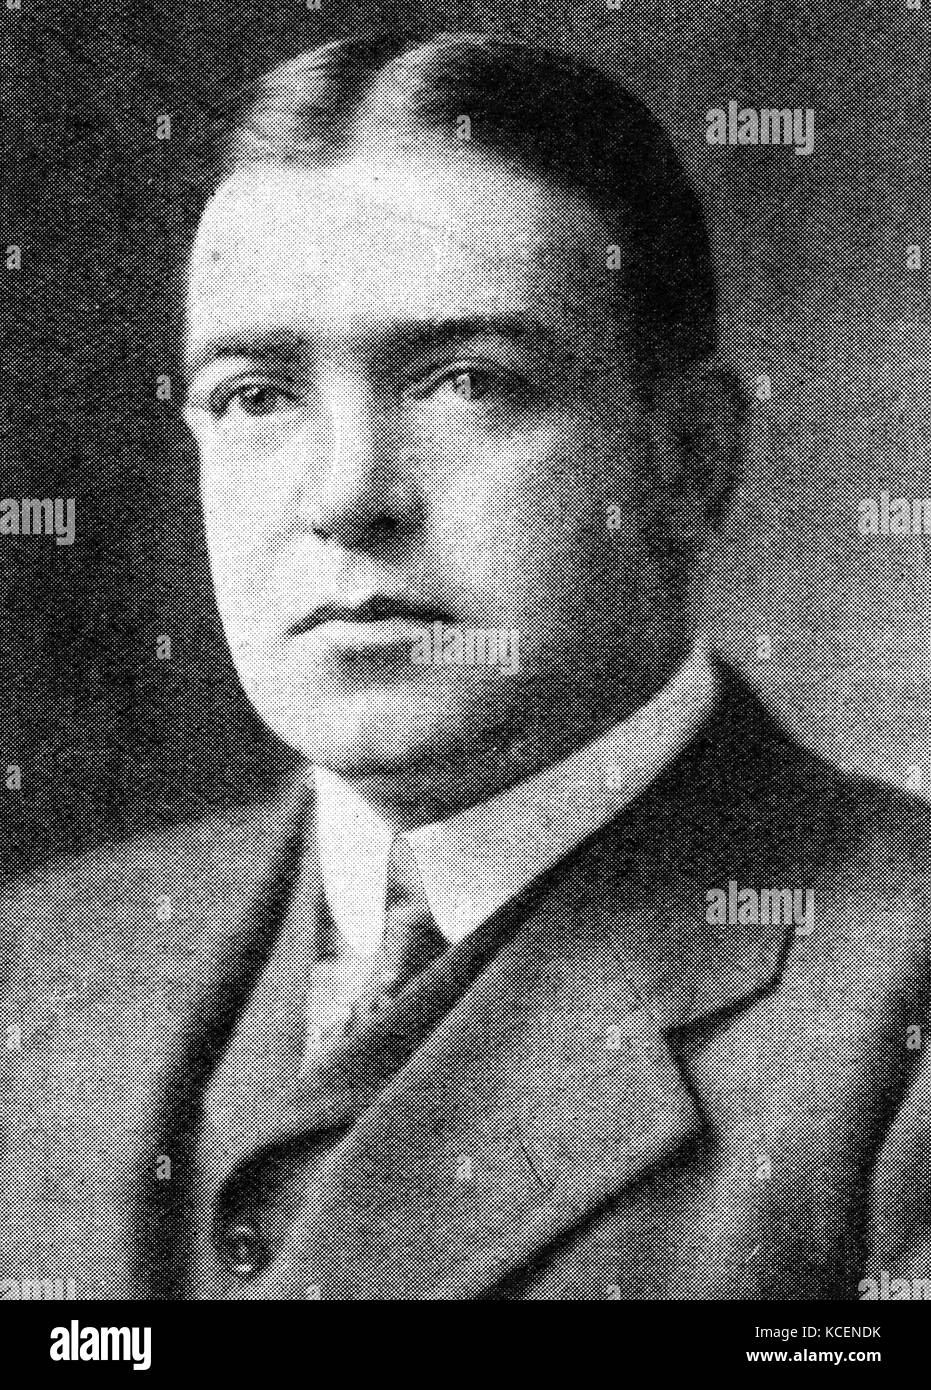 Photograph of Sir Ernest Shackleton (1874-1922) a polar explorer and leader of British expeditions to the Antarctic. Dated 20th Century Stock Photo